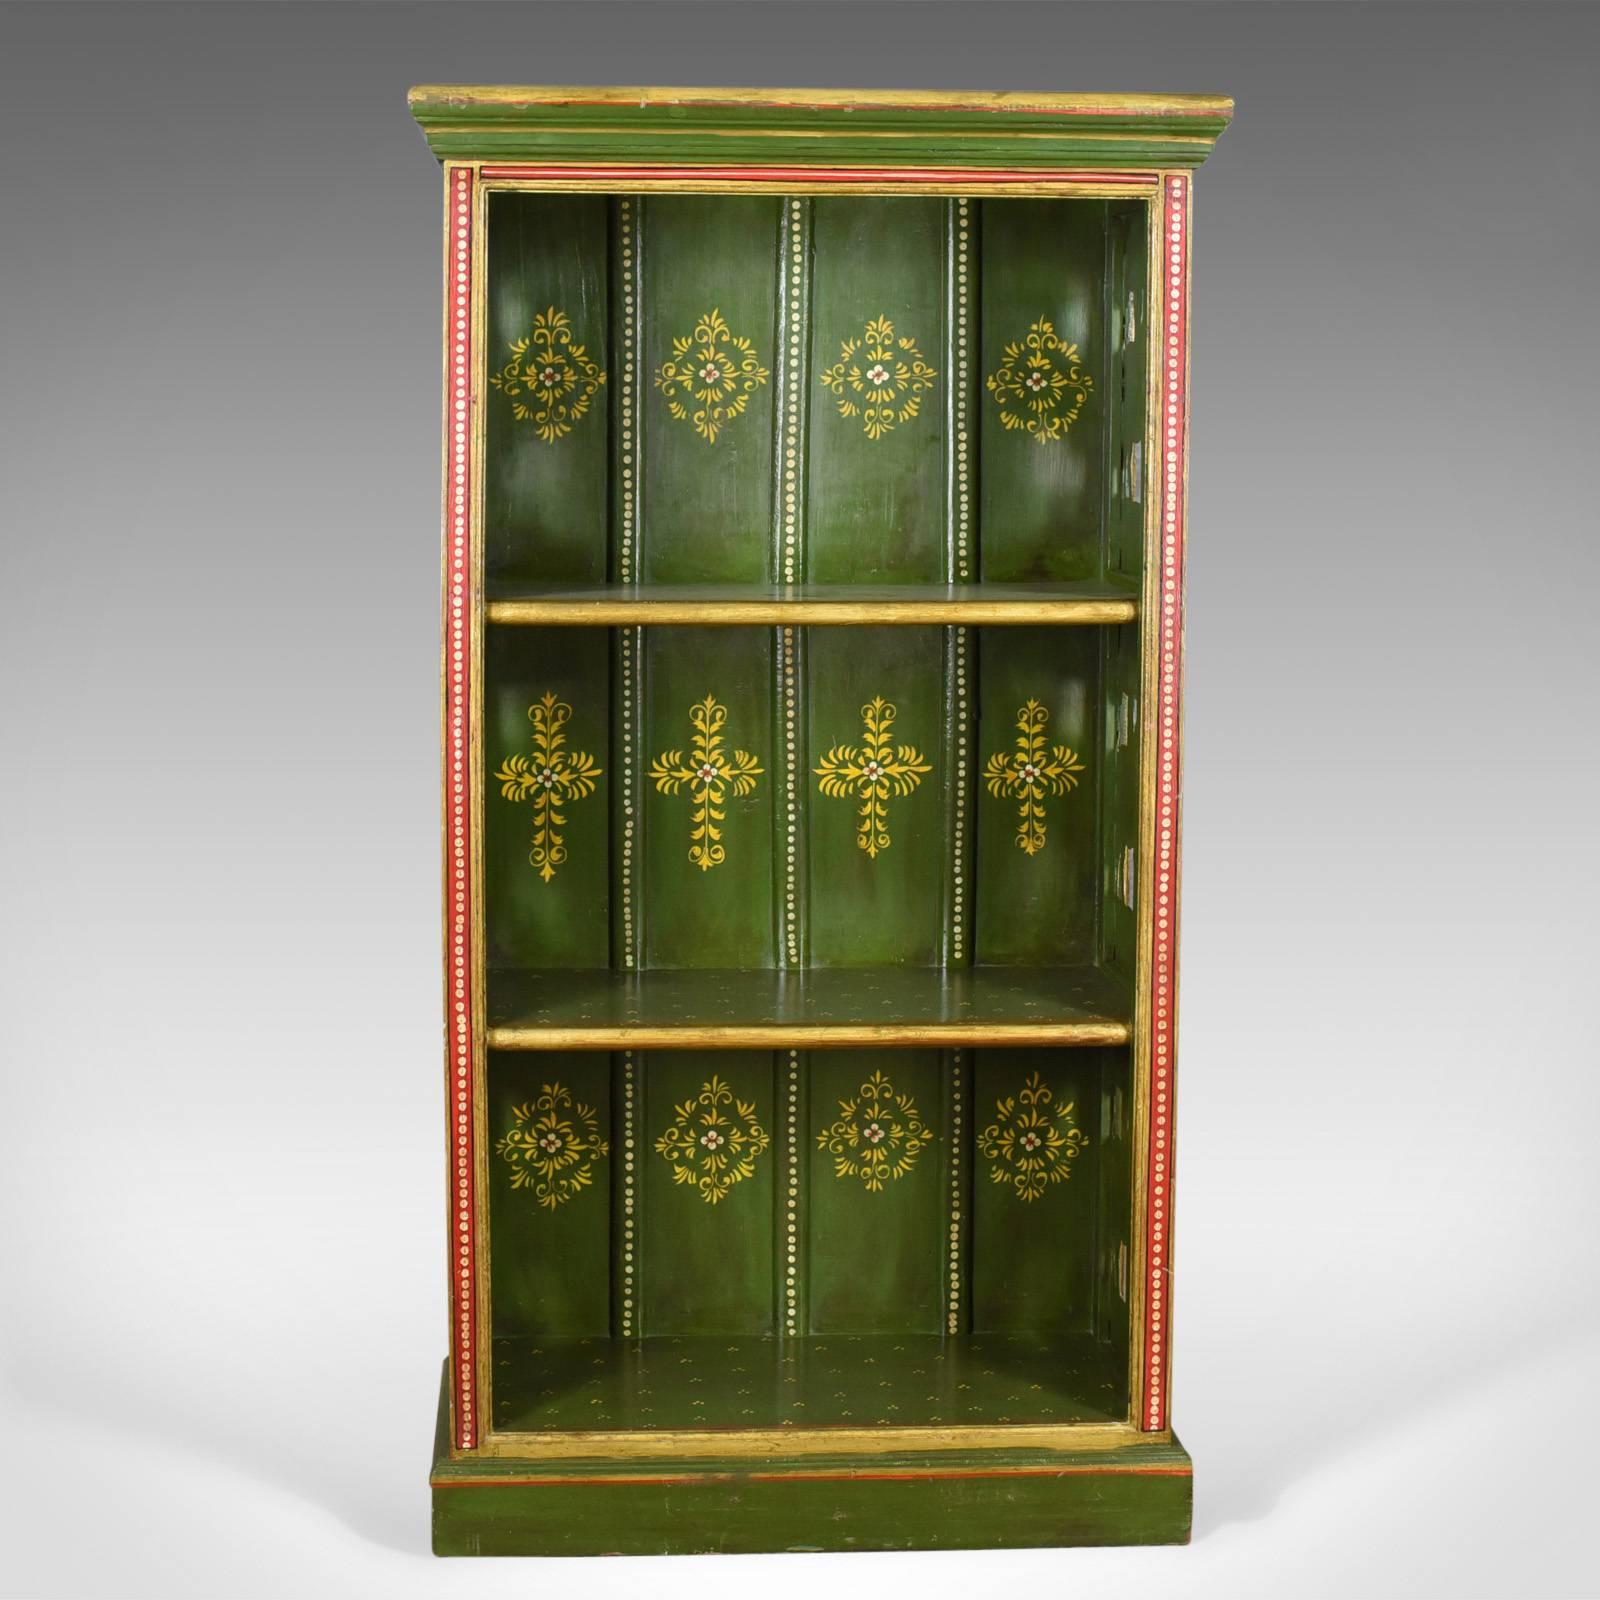 This is an antique painted bookcase, a European, possibly Scandinavian, Provincial book shelf with an equine theme dating to circa 1900.

Substantially crafted in hardwood
Traditionally painted in red, green and gold
Decorated with stylized